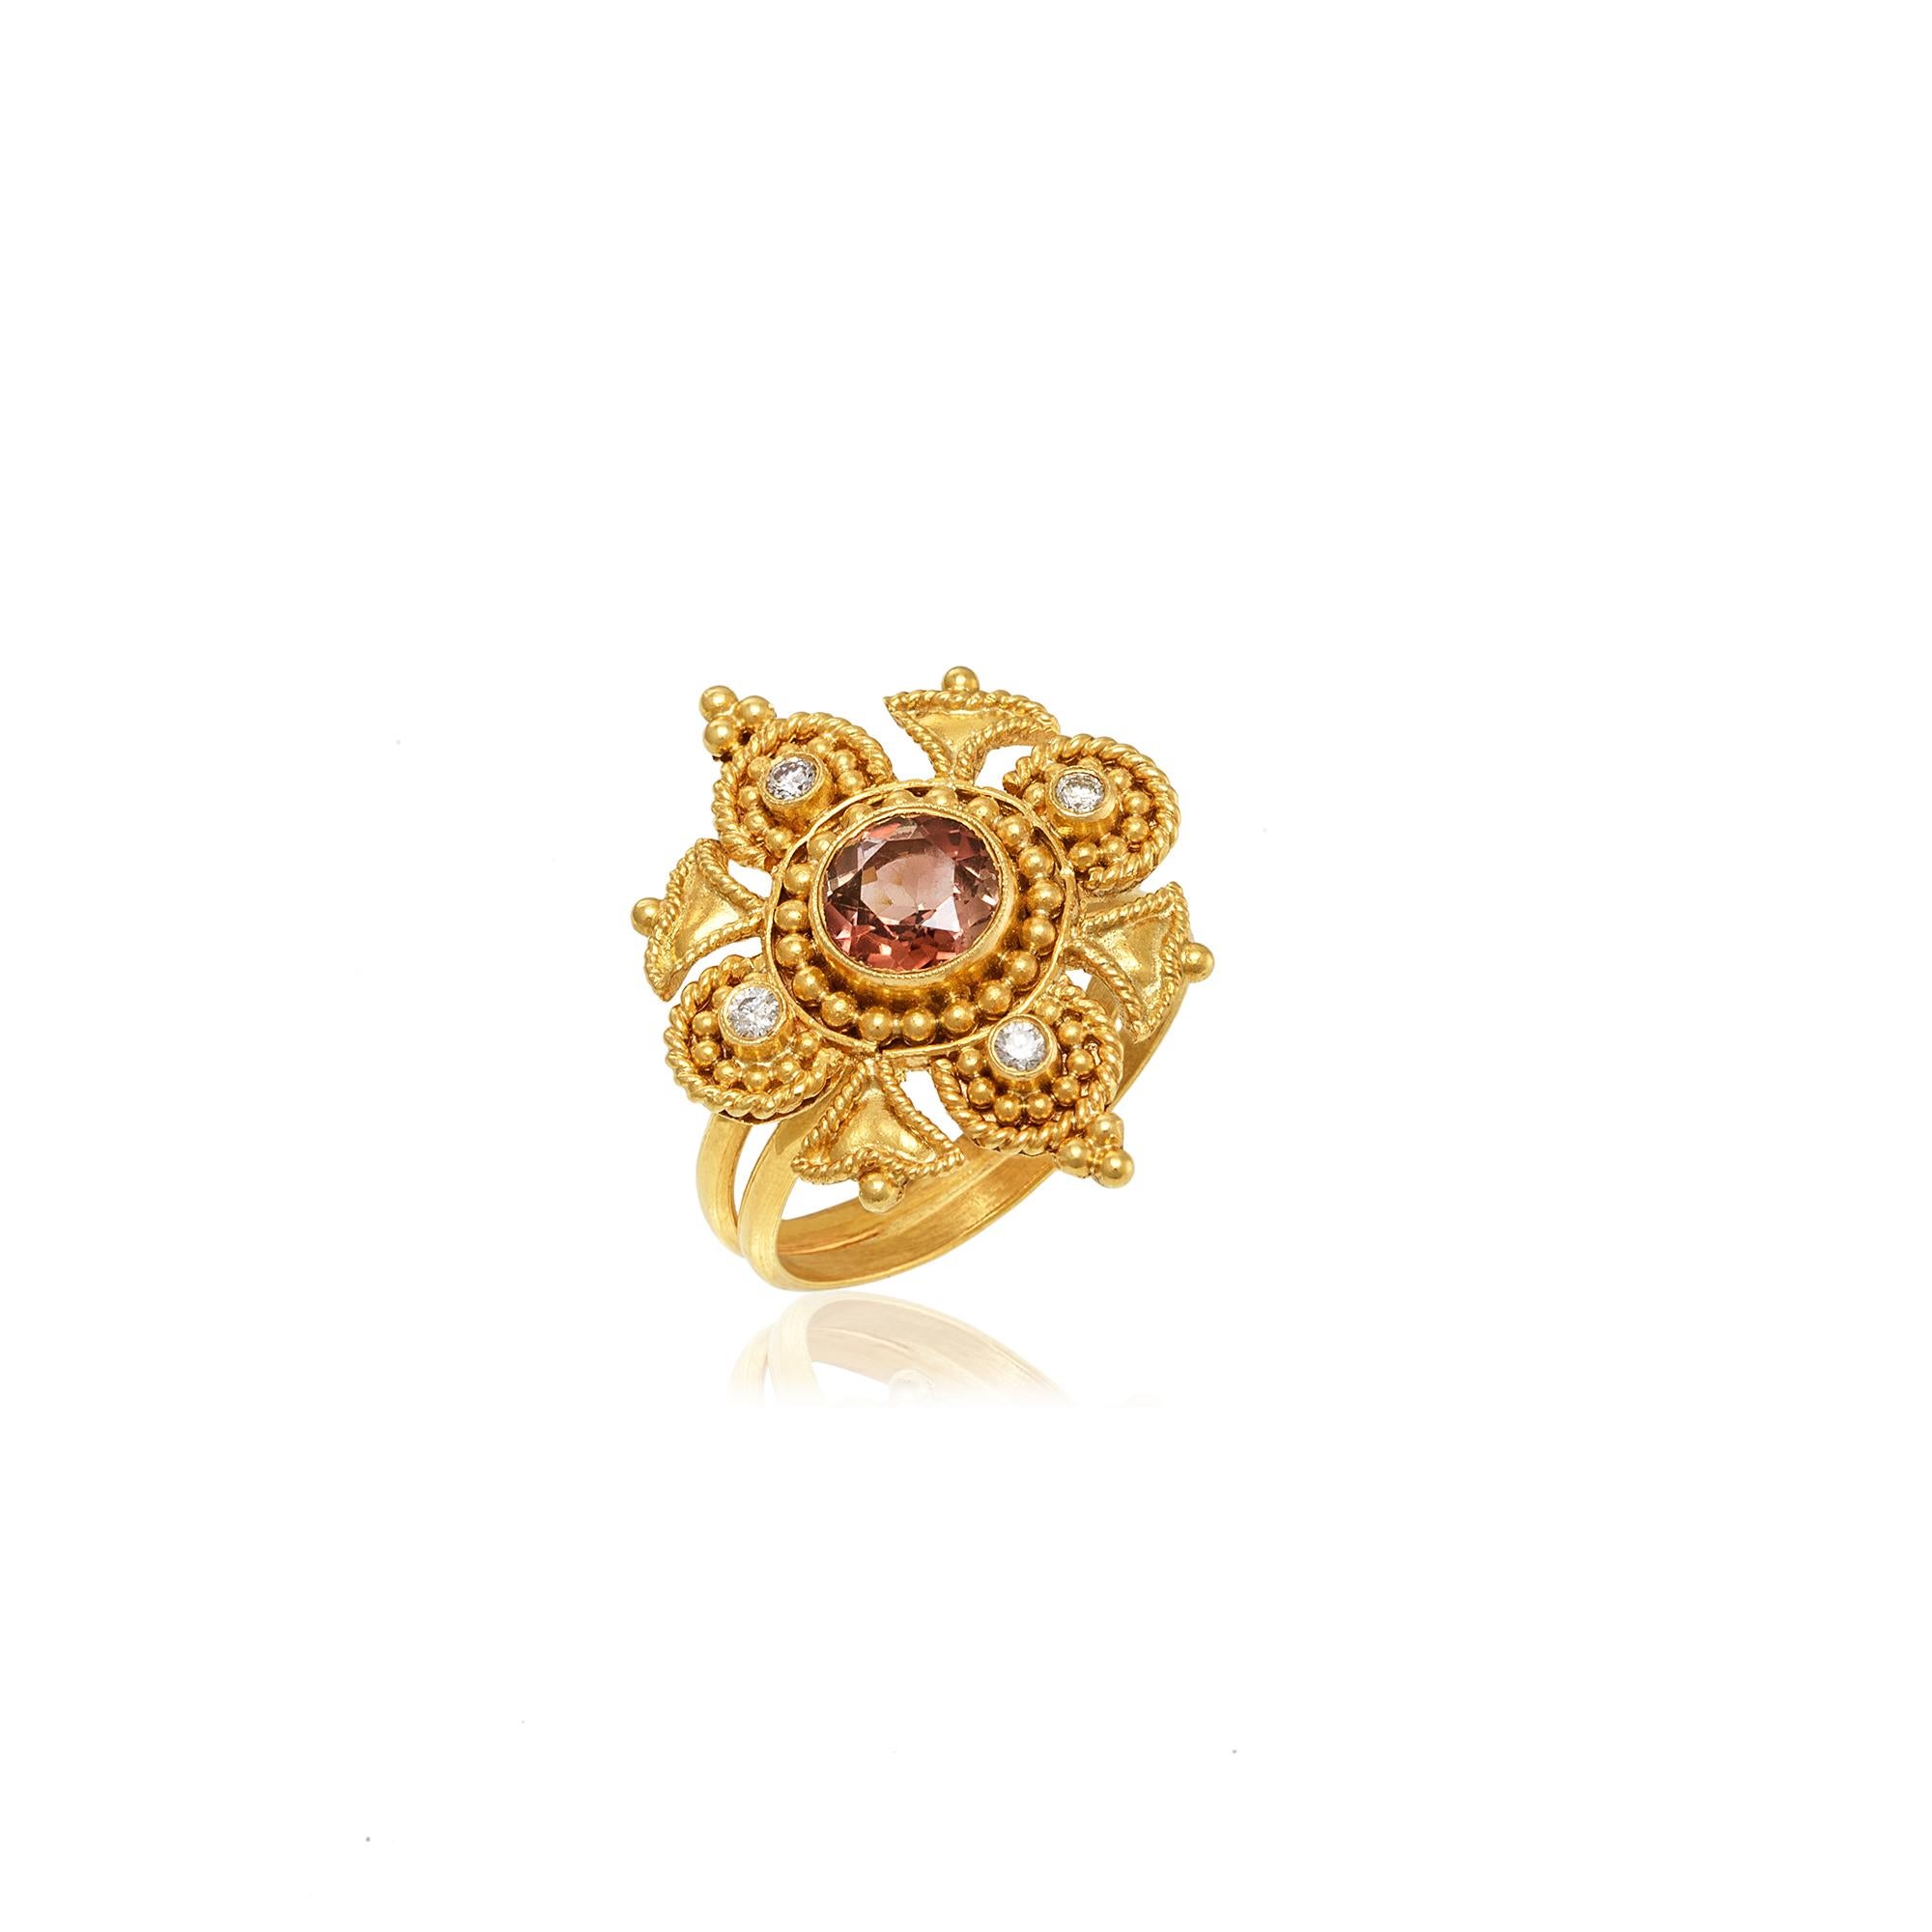 Flower shape Byzantine ring handcrafted in 22Kt yellow gold, featuring a Tourmaline center and a brilliant cut diamond in each petal. This breathtaking ring is created using the traditional techniques of filigree and granulation. Minute gold beads